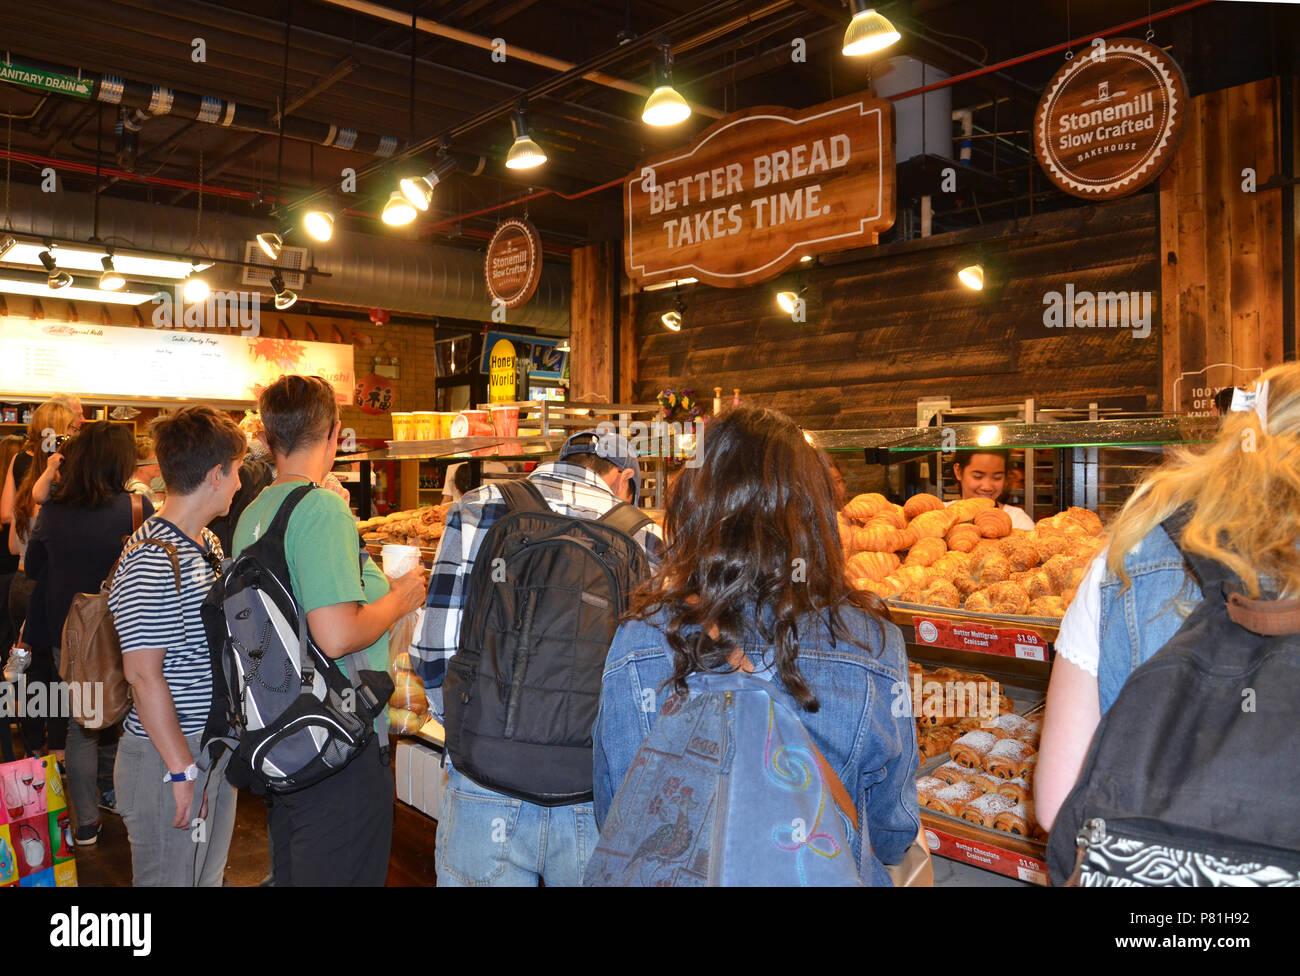 TORONTO, ON / CANADA - MAY 26, 2018: Shoppers stop at the Stonemill Bakehouse inside the St. Lawrence Market. Stock Photo